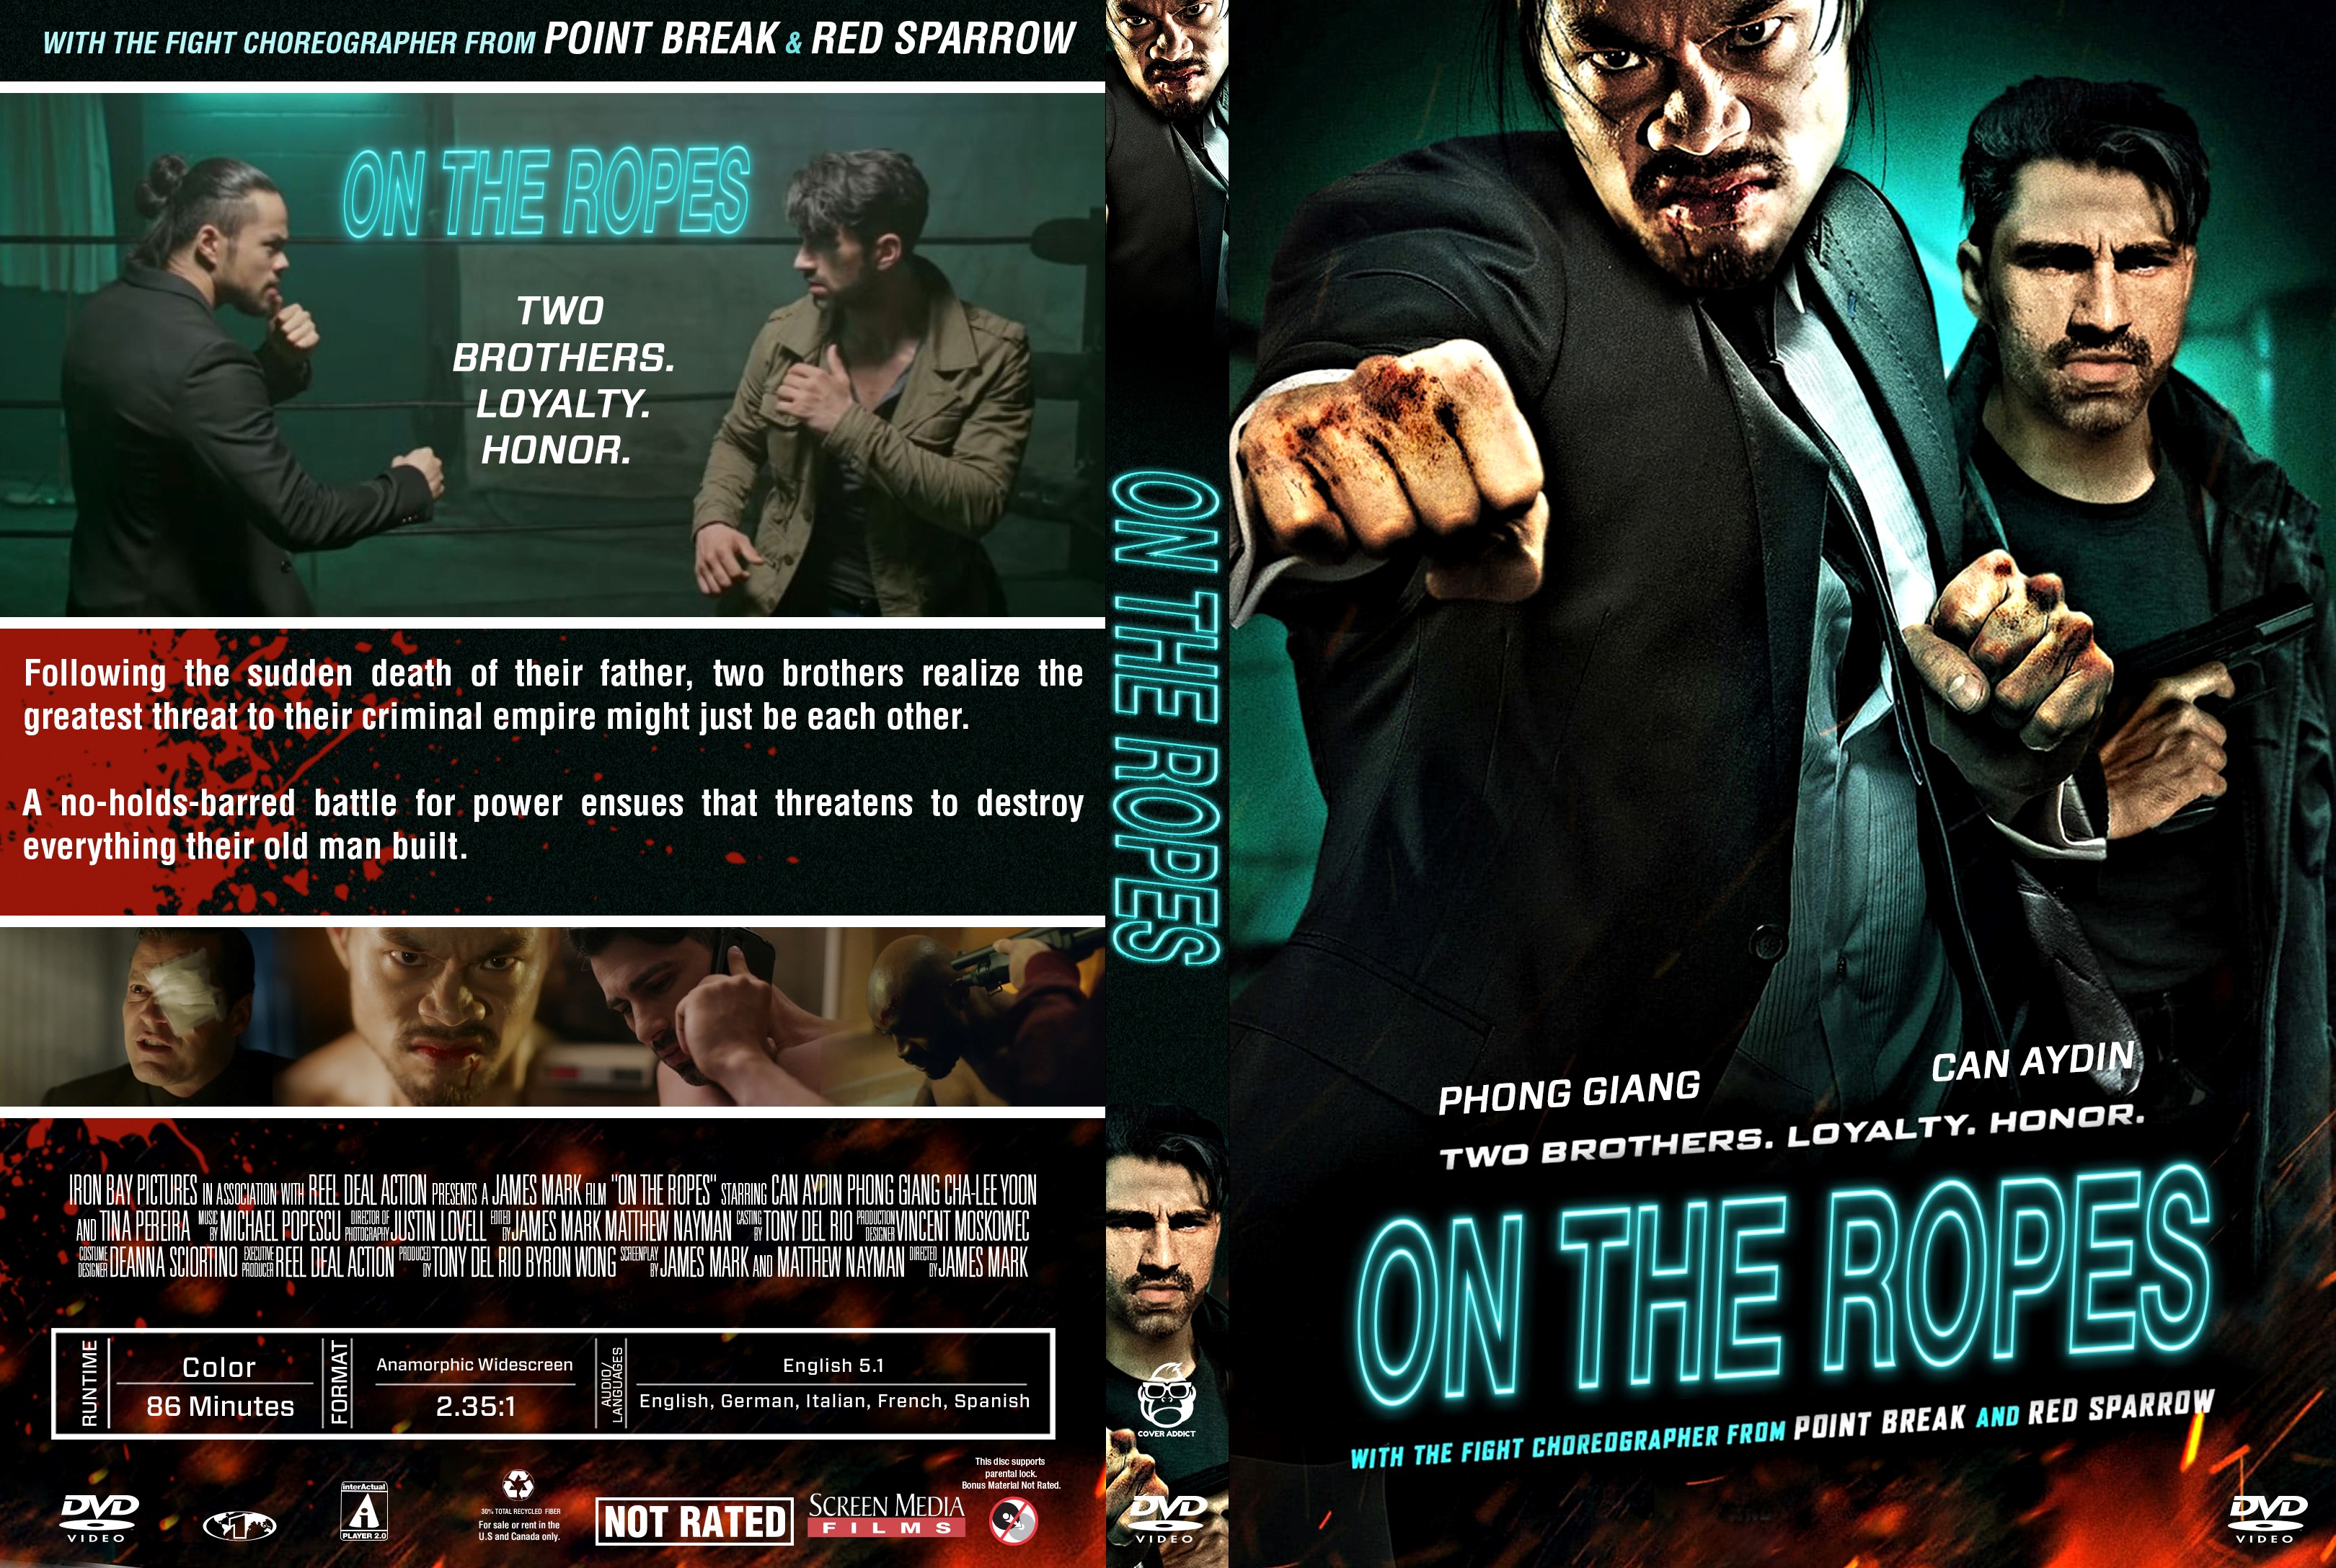 On The Ropes DVD Cover | Cover Addict - Free DVD, Bluray Covers and Movie Posters3240 x 2175